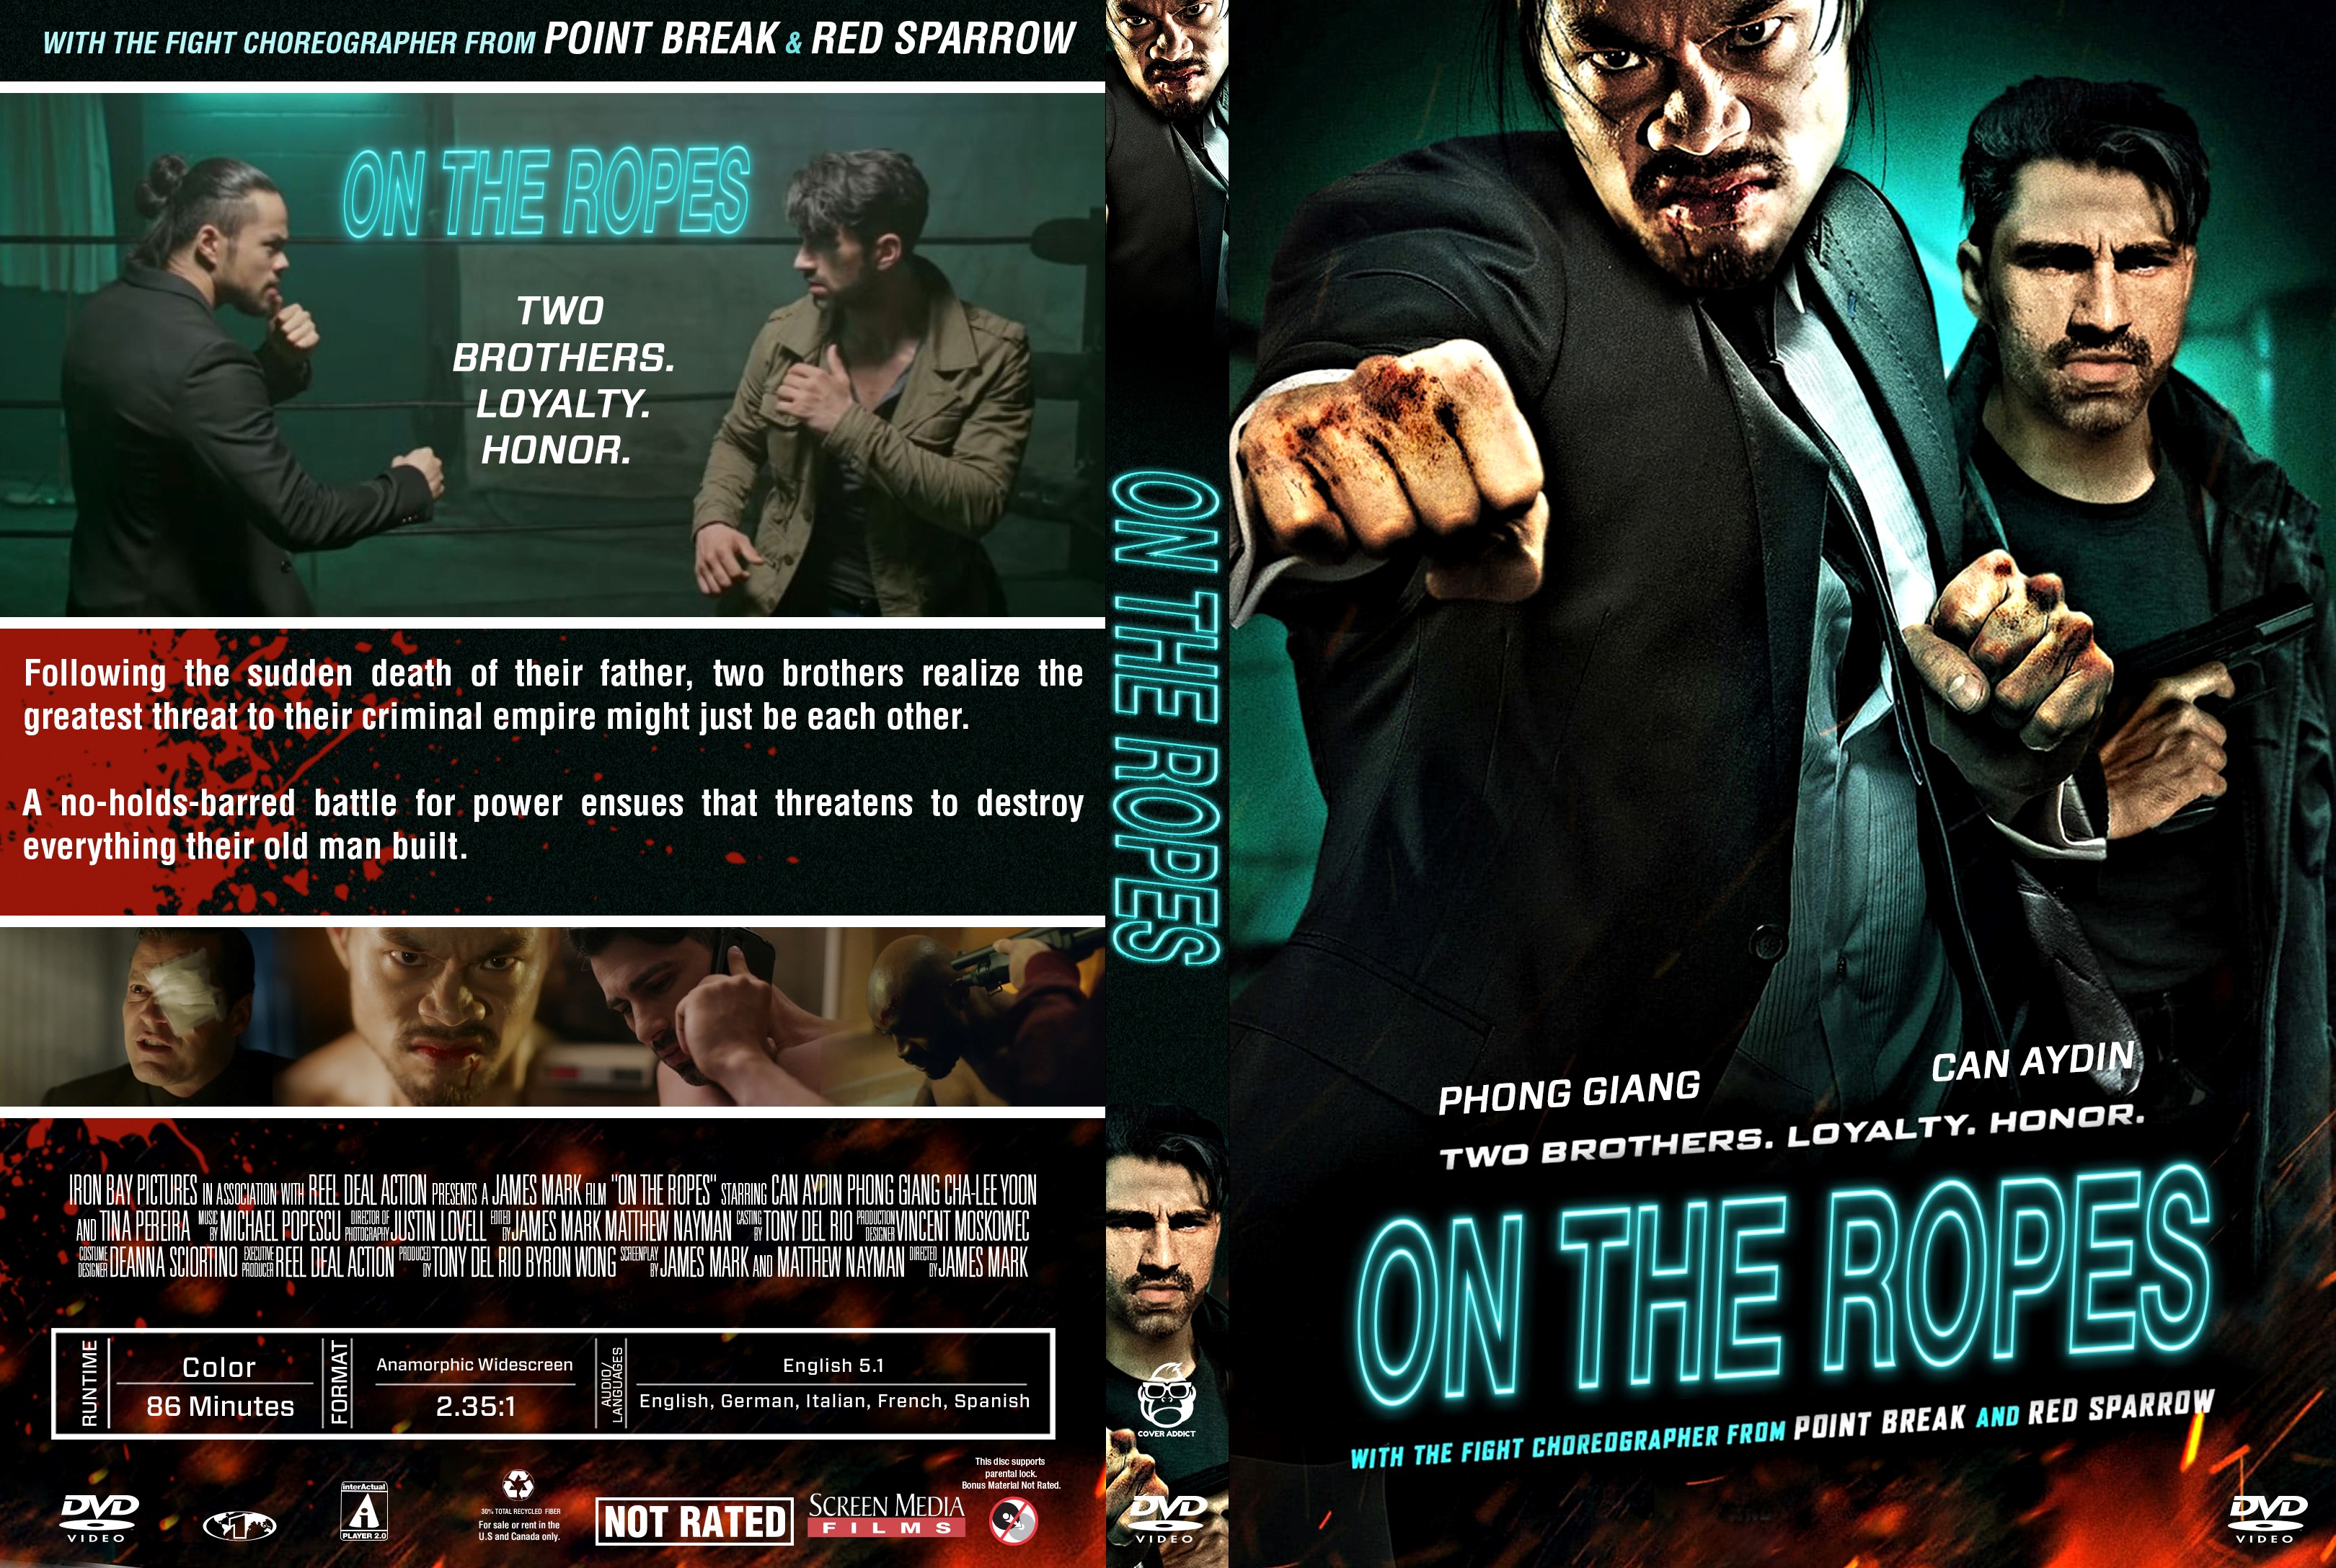 On The Ropes DVD Cover | Cover Addict - Free DVD, Bluray Covers and Movie Posters3240 x 2175